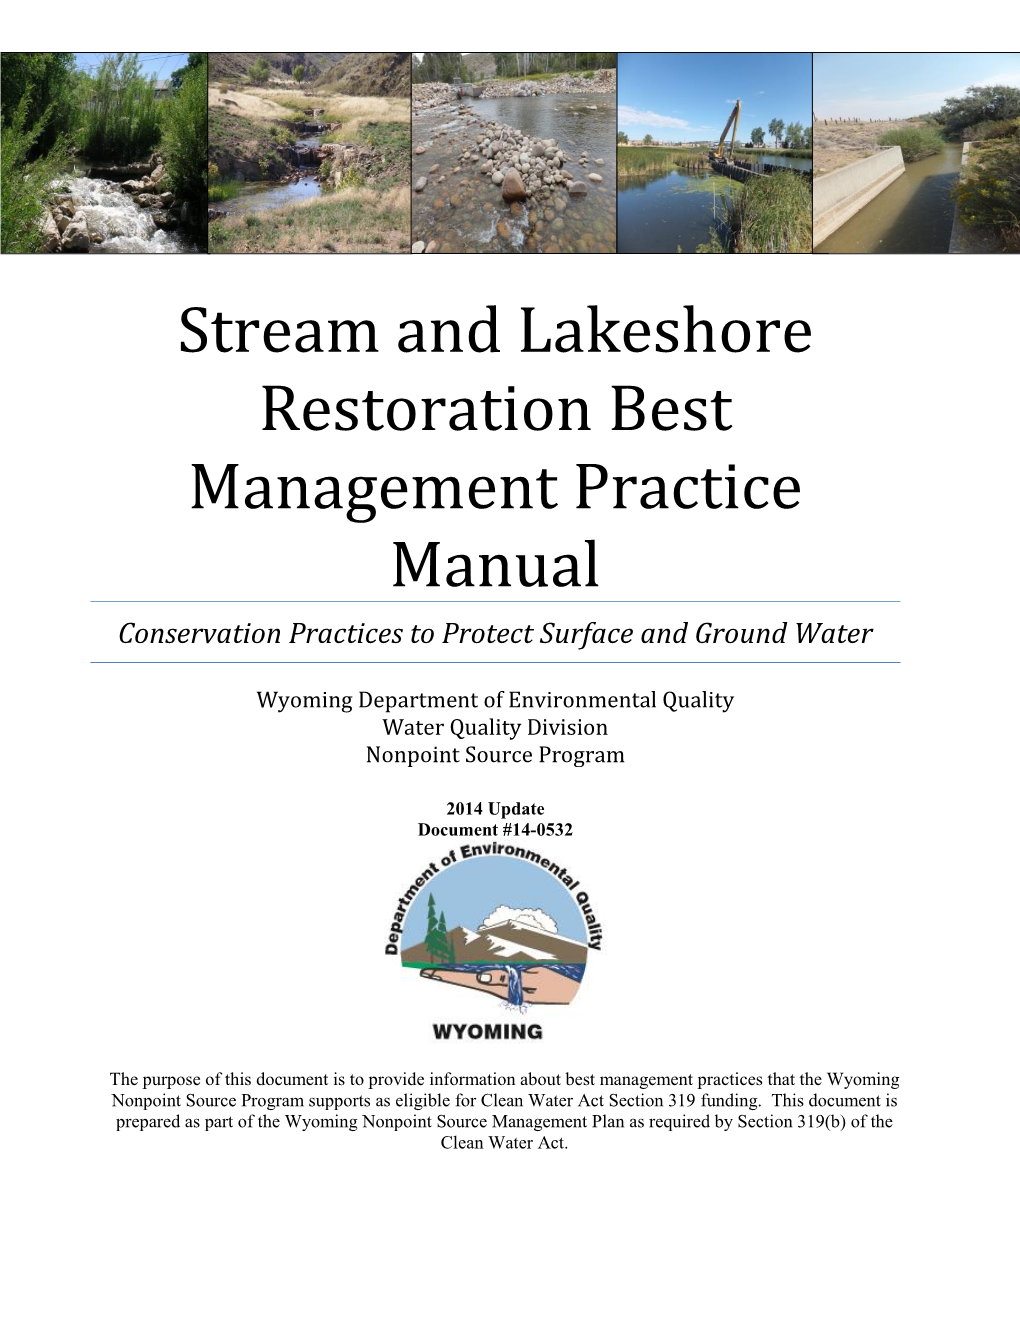 Stream and Lakeshore Restoration Best Management Practice Manual Conservation Practices to Protect Surface and Ground Water